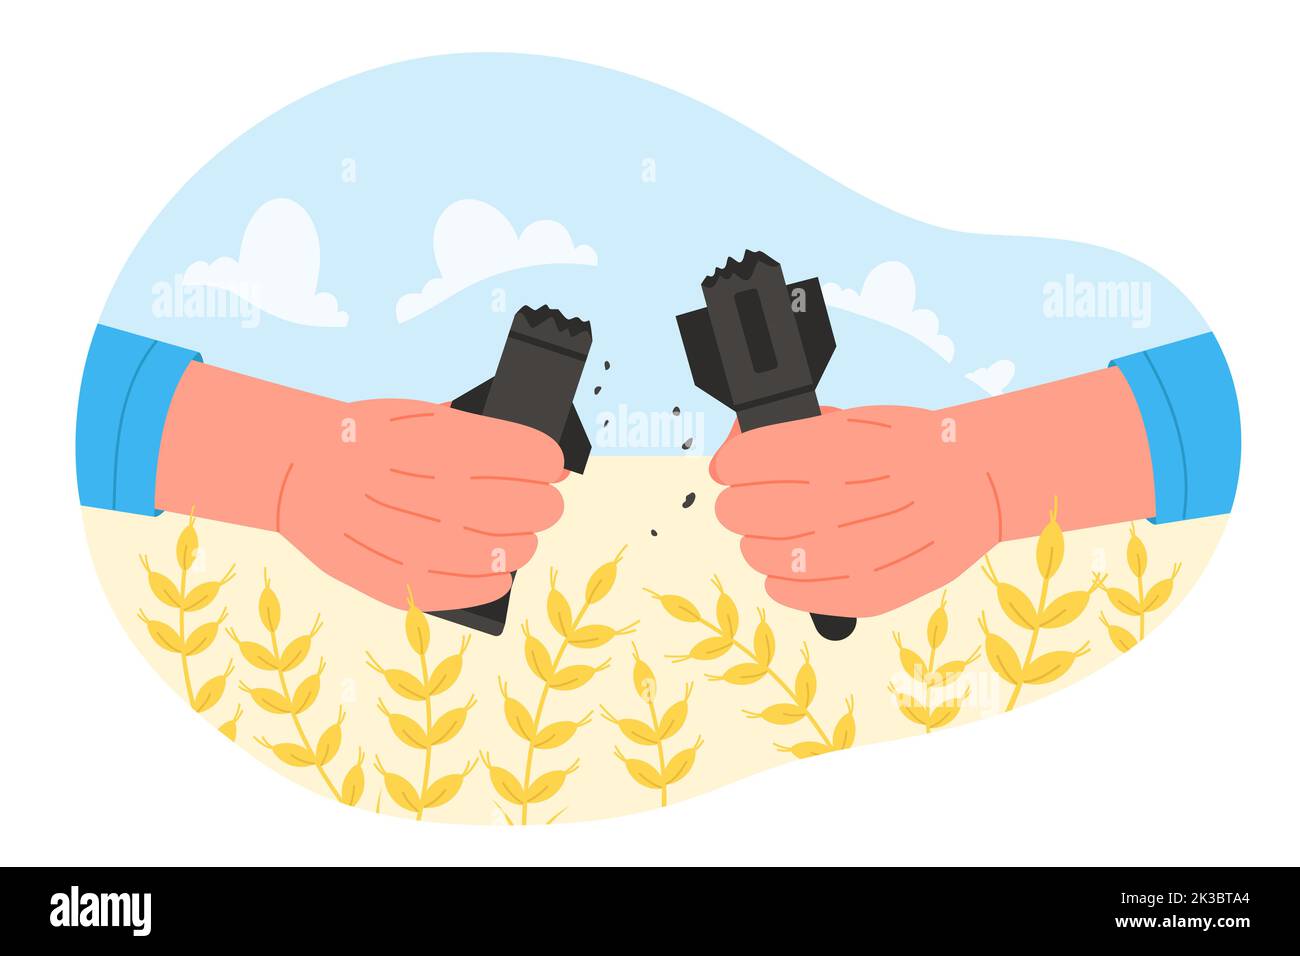 Hands breaking rocket over field of wheat to protect world and country from war vector illustration. Cartoon person holding broken missile, warning about military violence. Stop war, peace concept Stock Vector